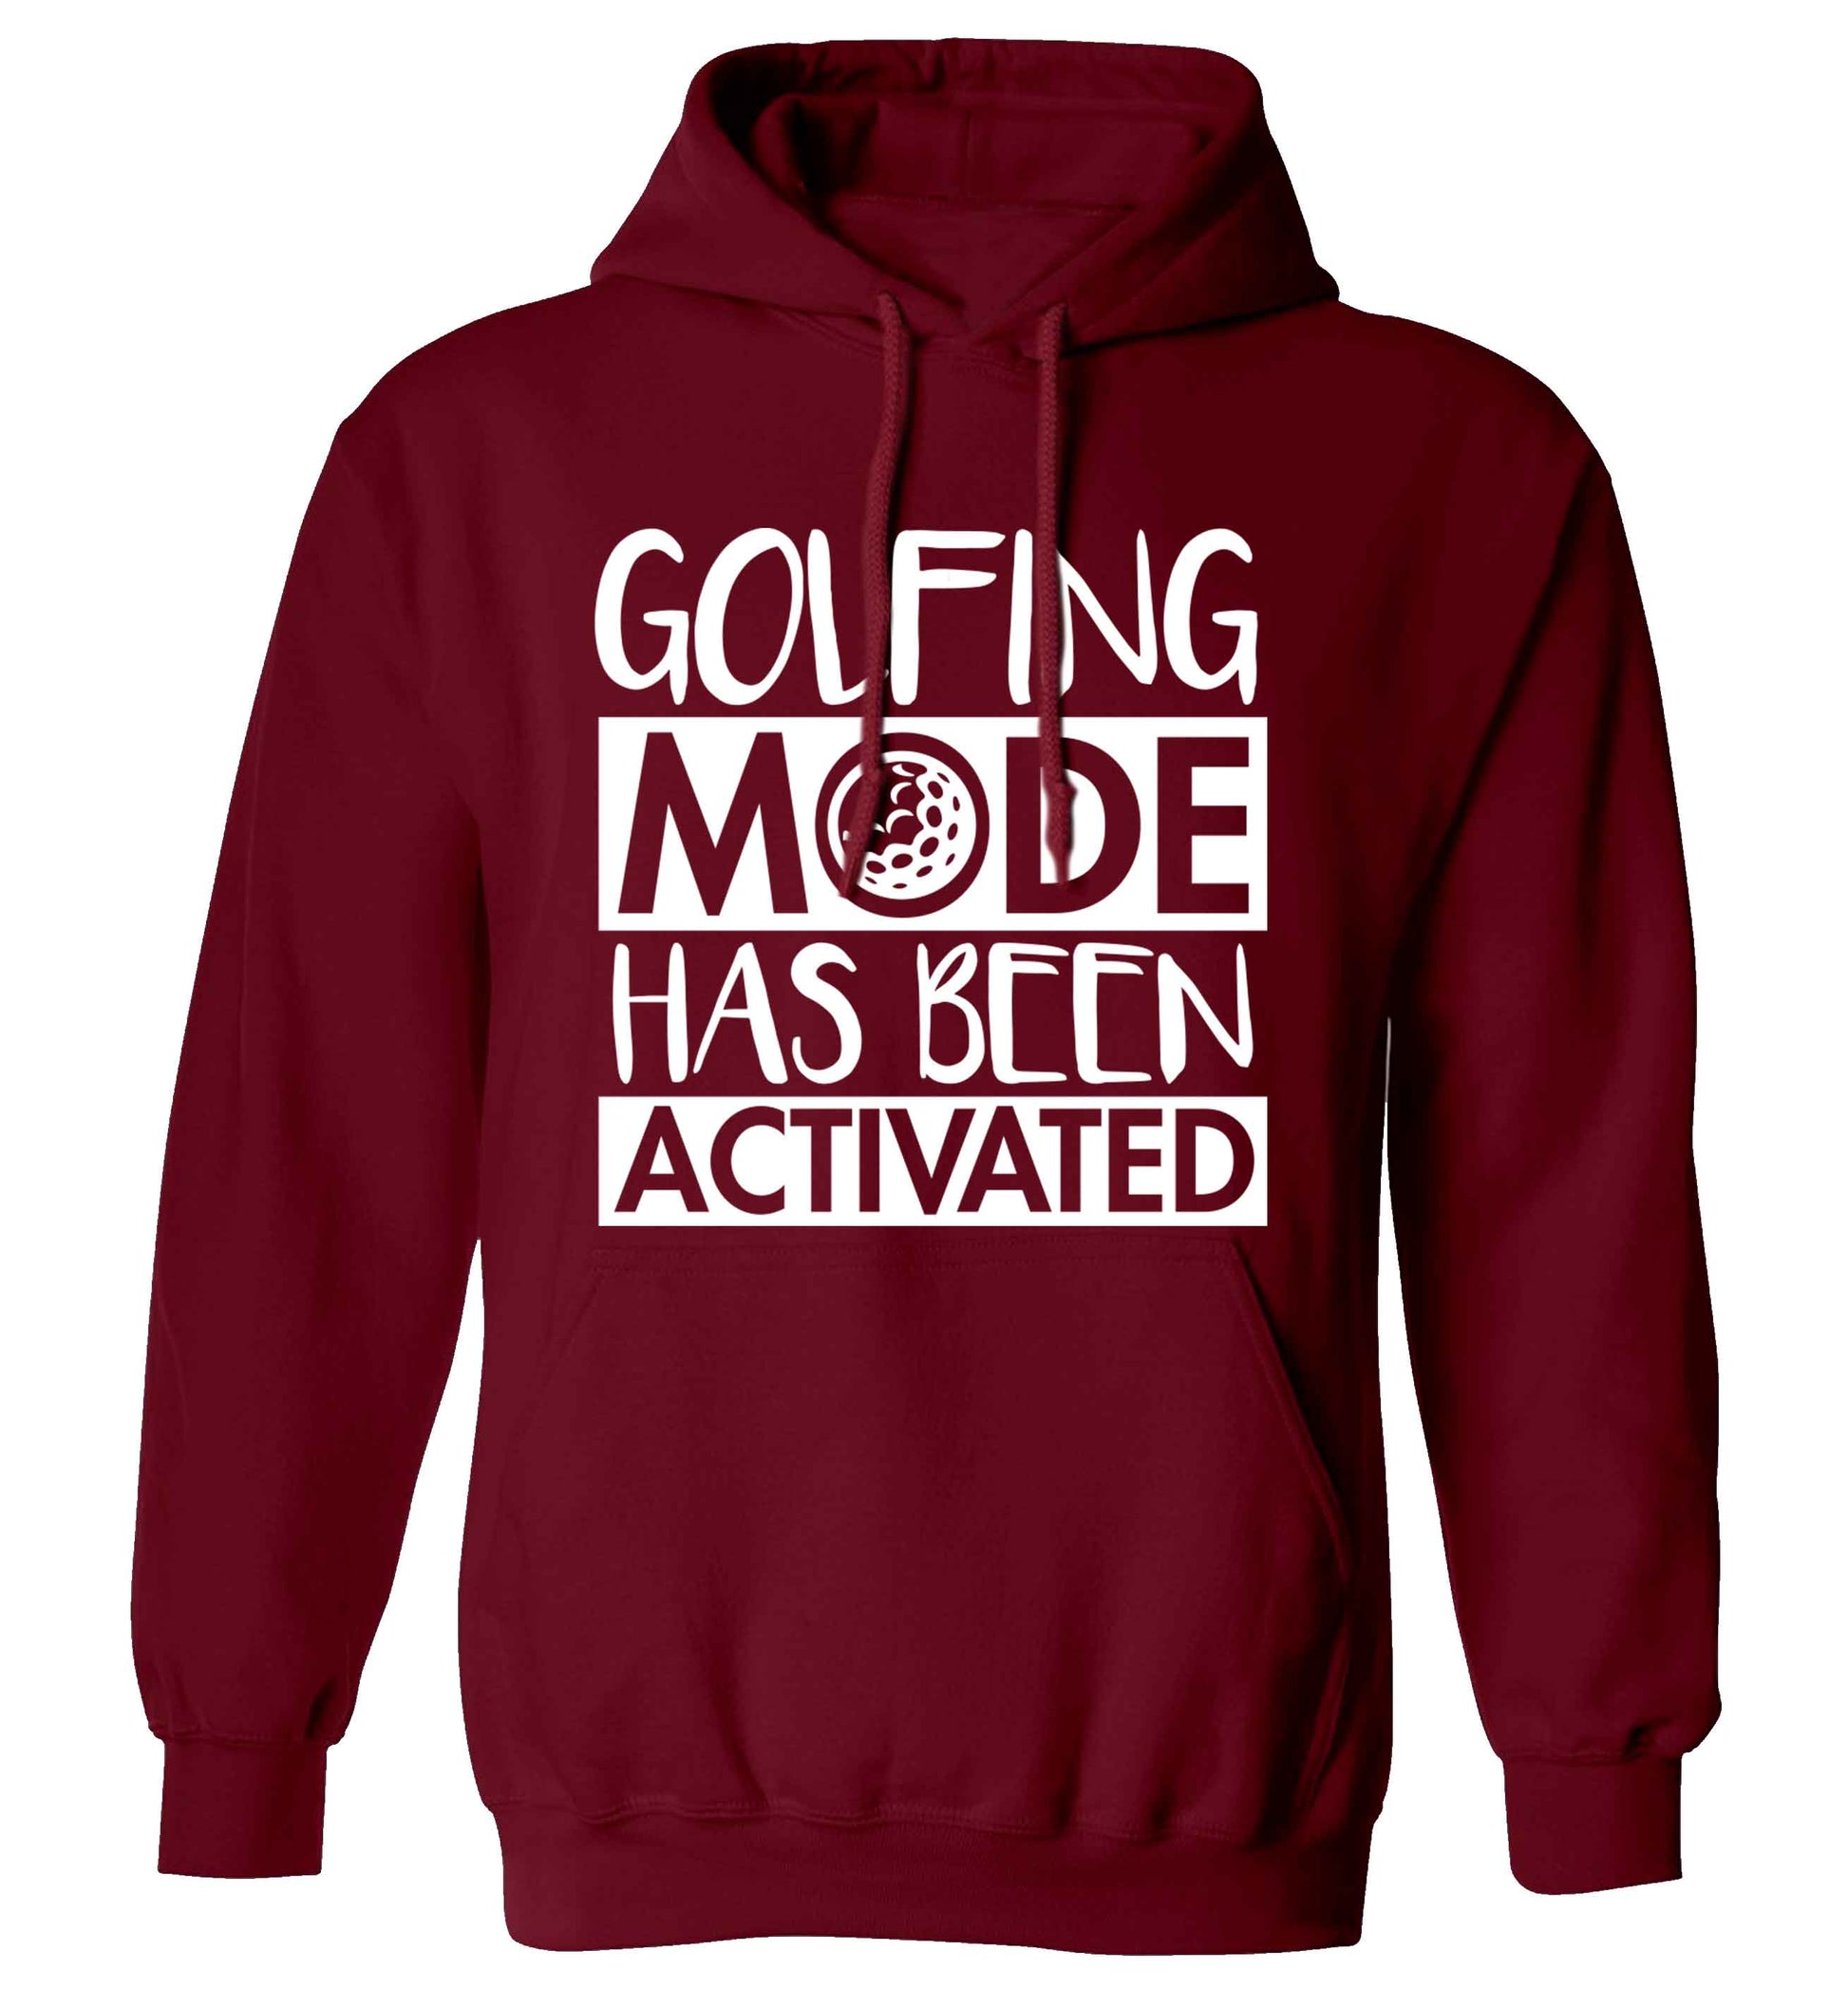 Golfing mode has been activated adults unisex maroon hoodie 2XL